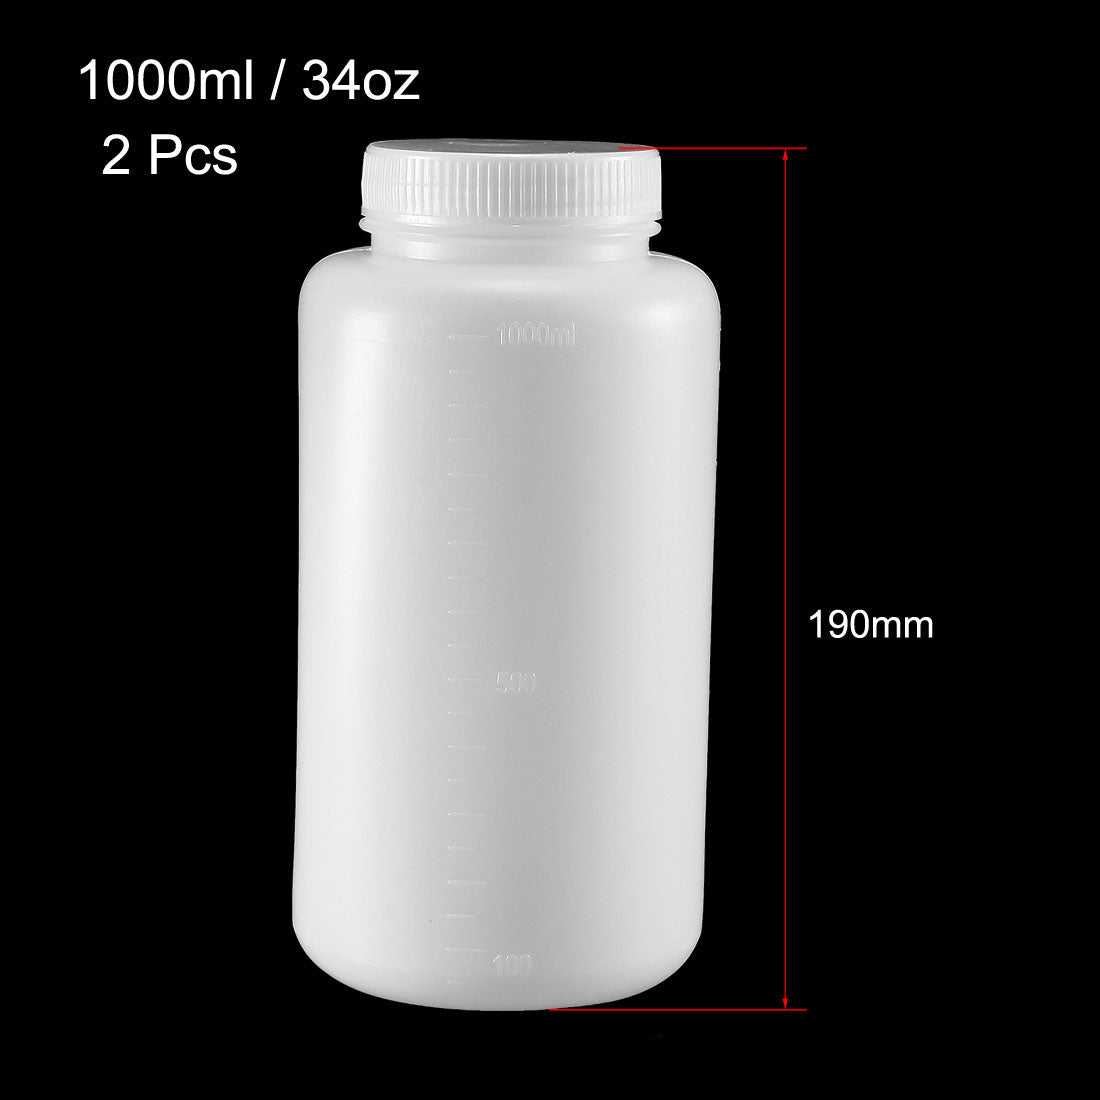 uxcell Uxcell Plastic Lab Chemical Reagent Bottle 1000ml/34oz Wide Mouth Sample Sealing Liquid Storage Container 2pcs